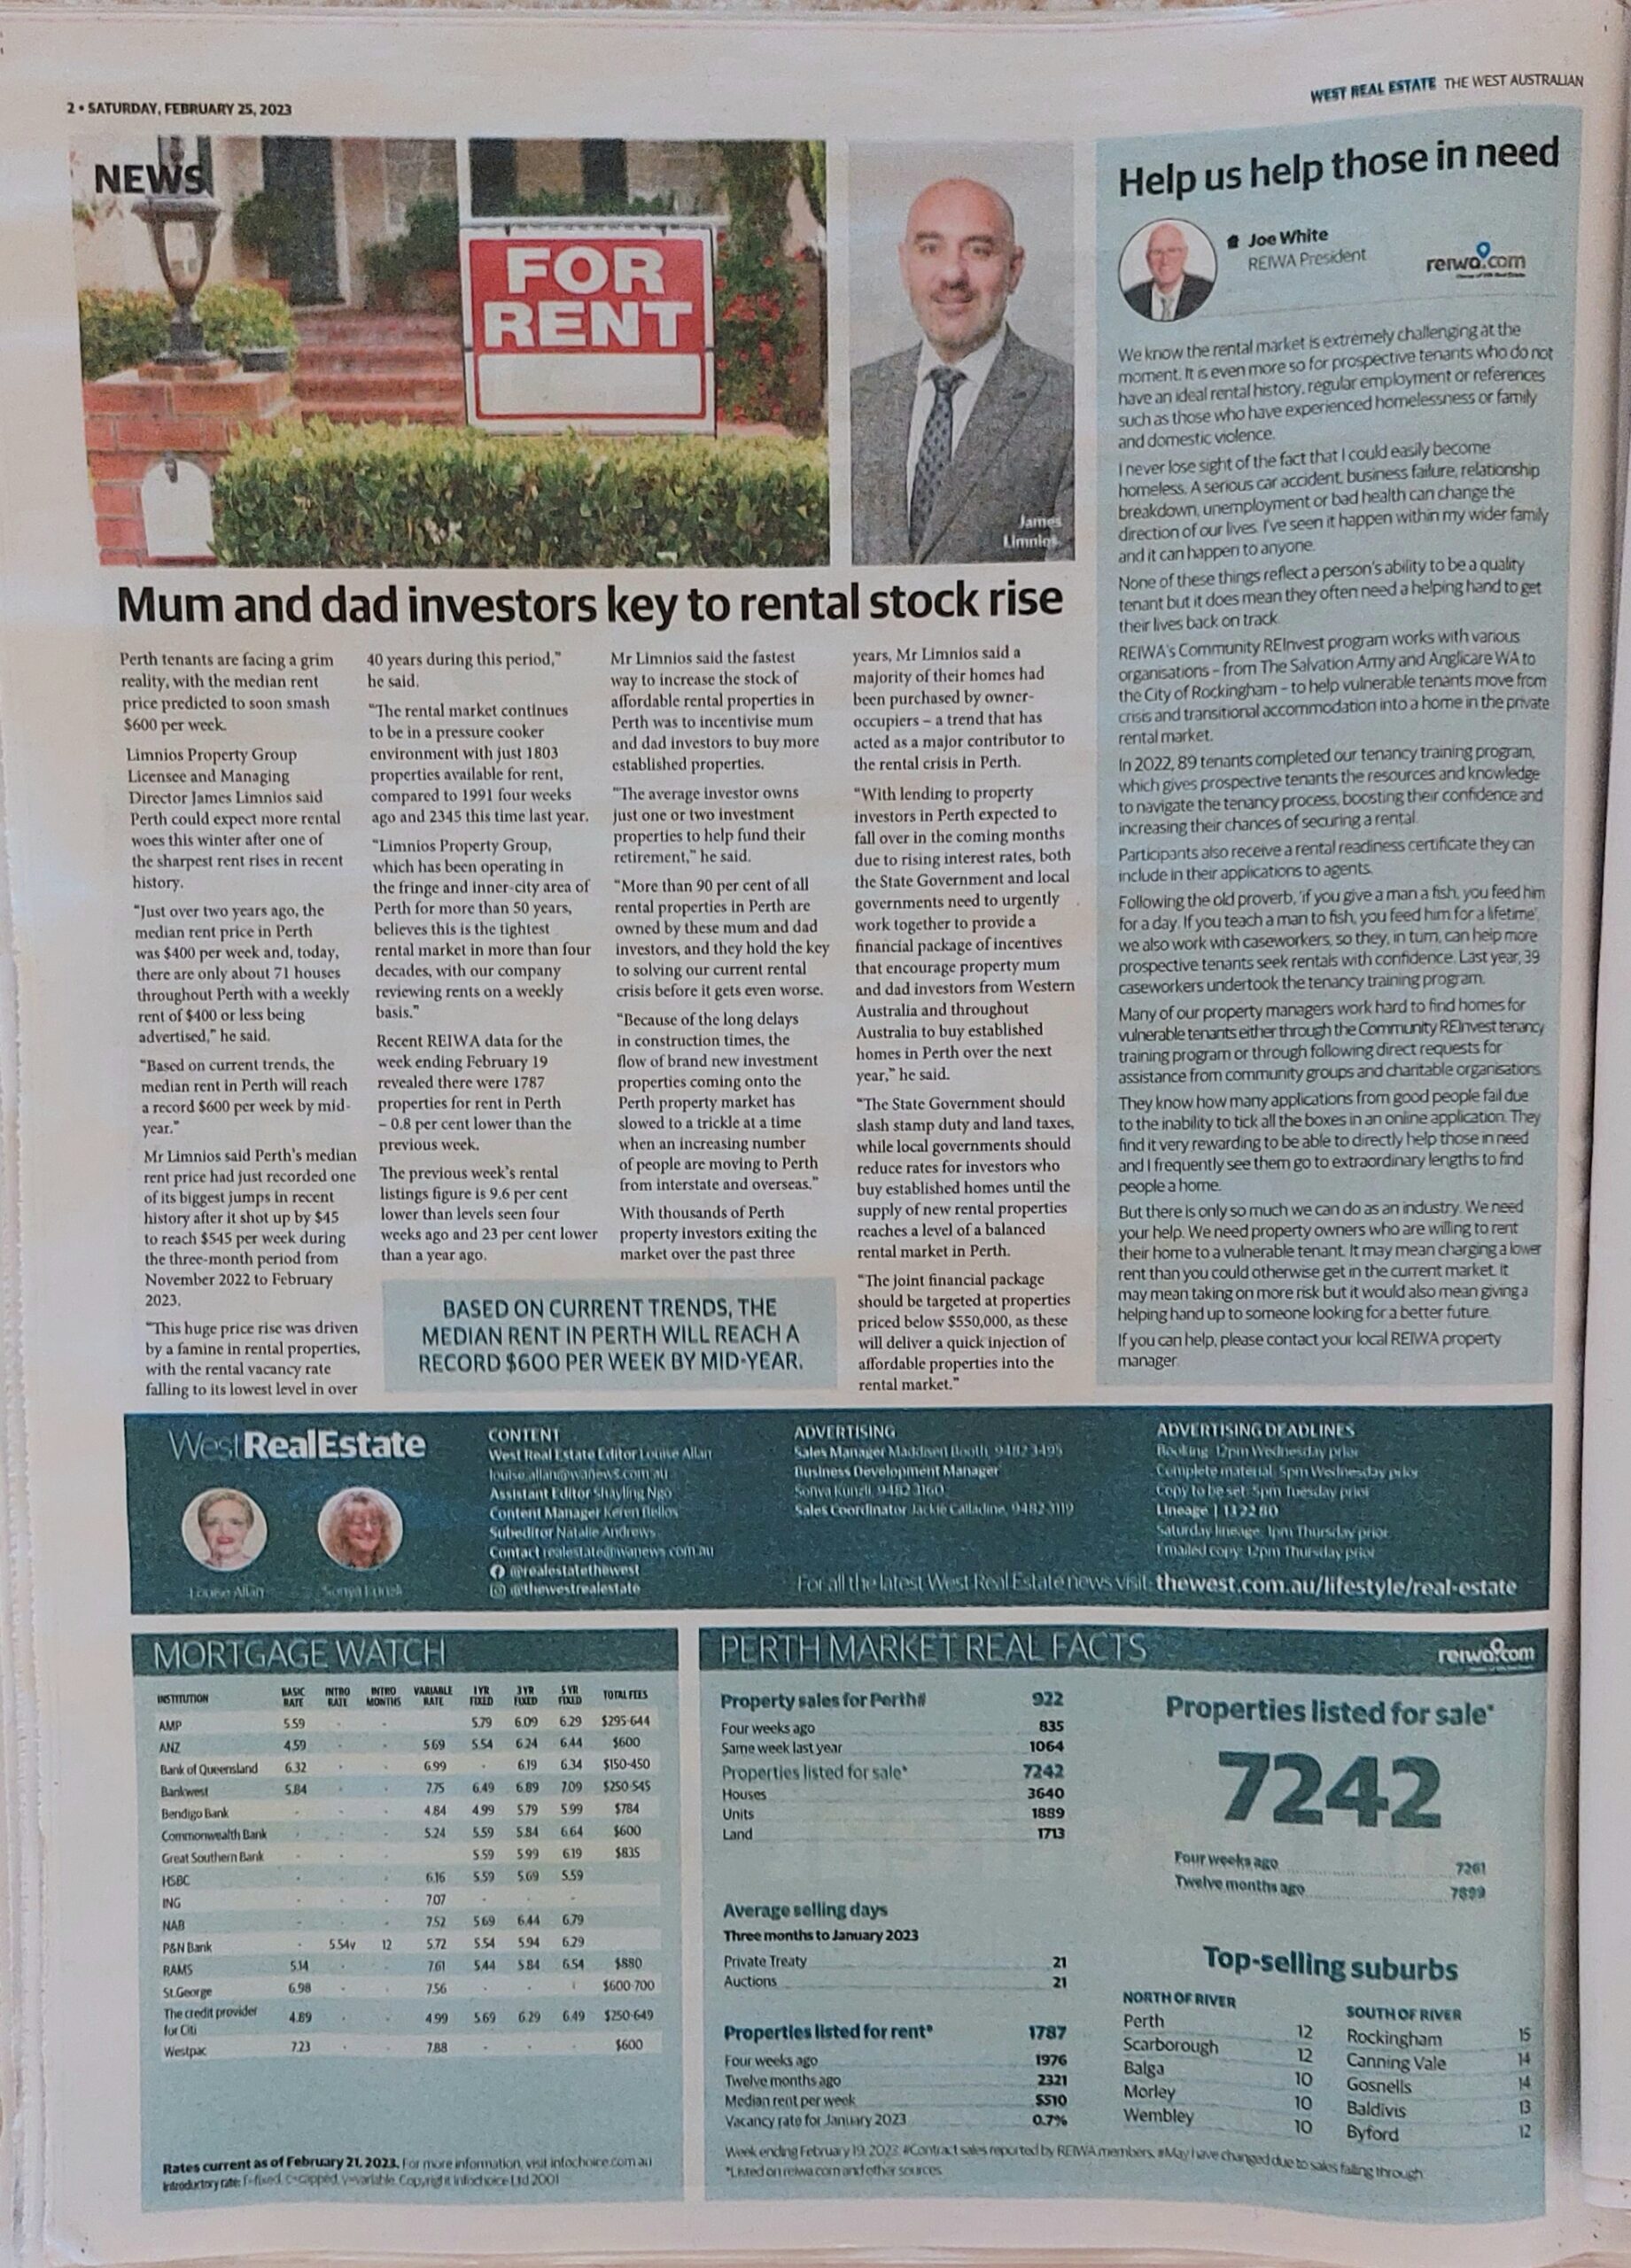 THE WEST AUSTRALIAN: MUM AND DAD INVESTORS KEY TO RENTAL STOCK RISE